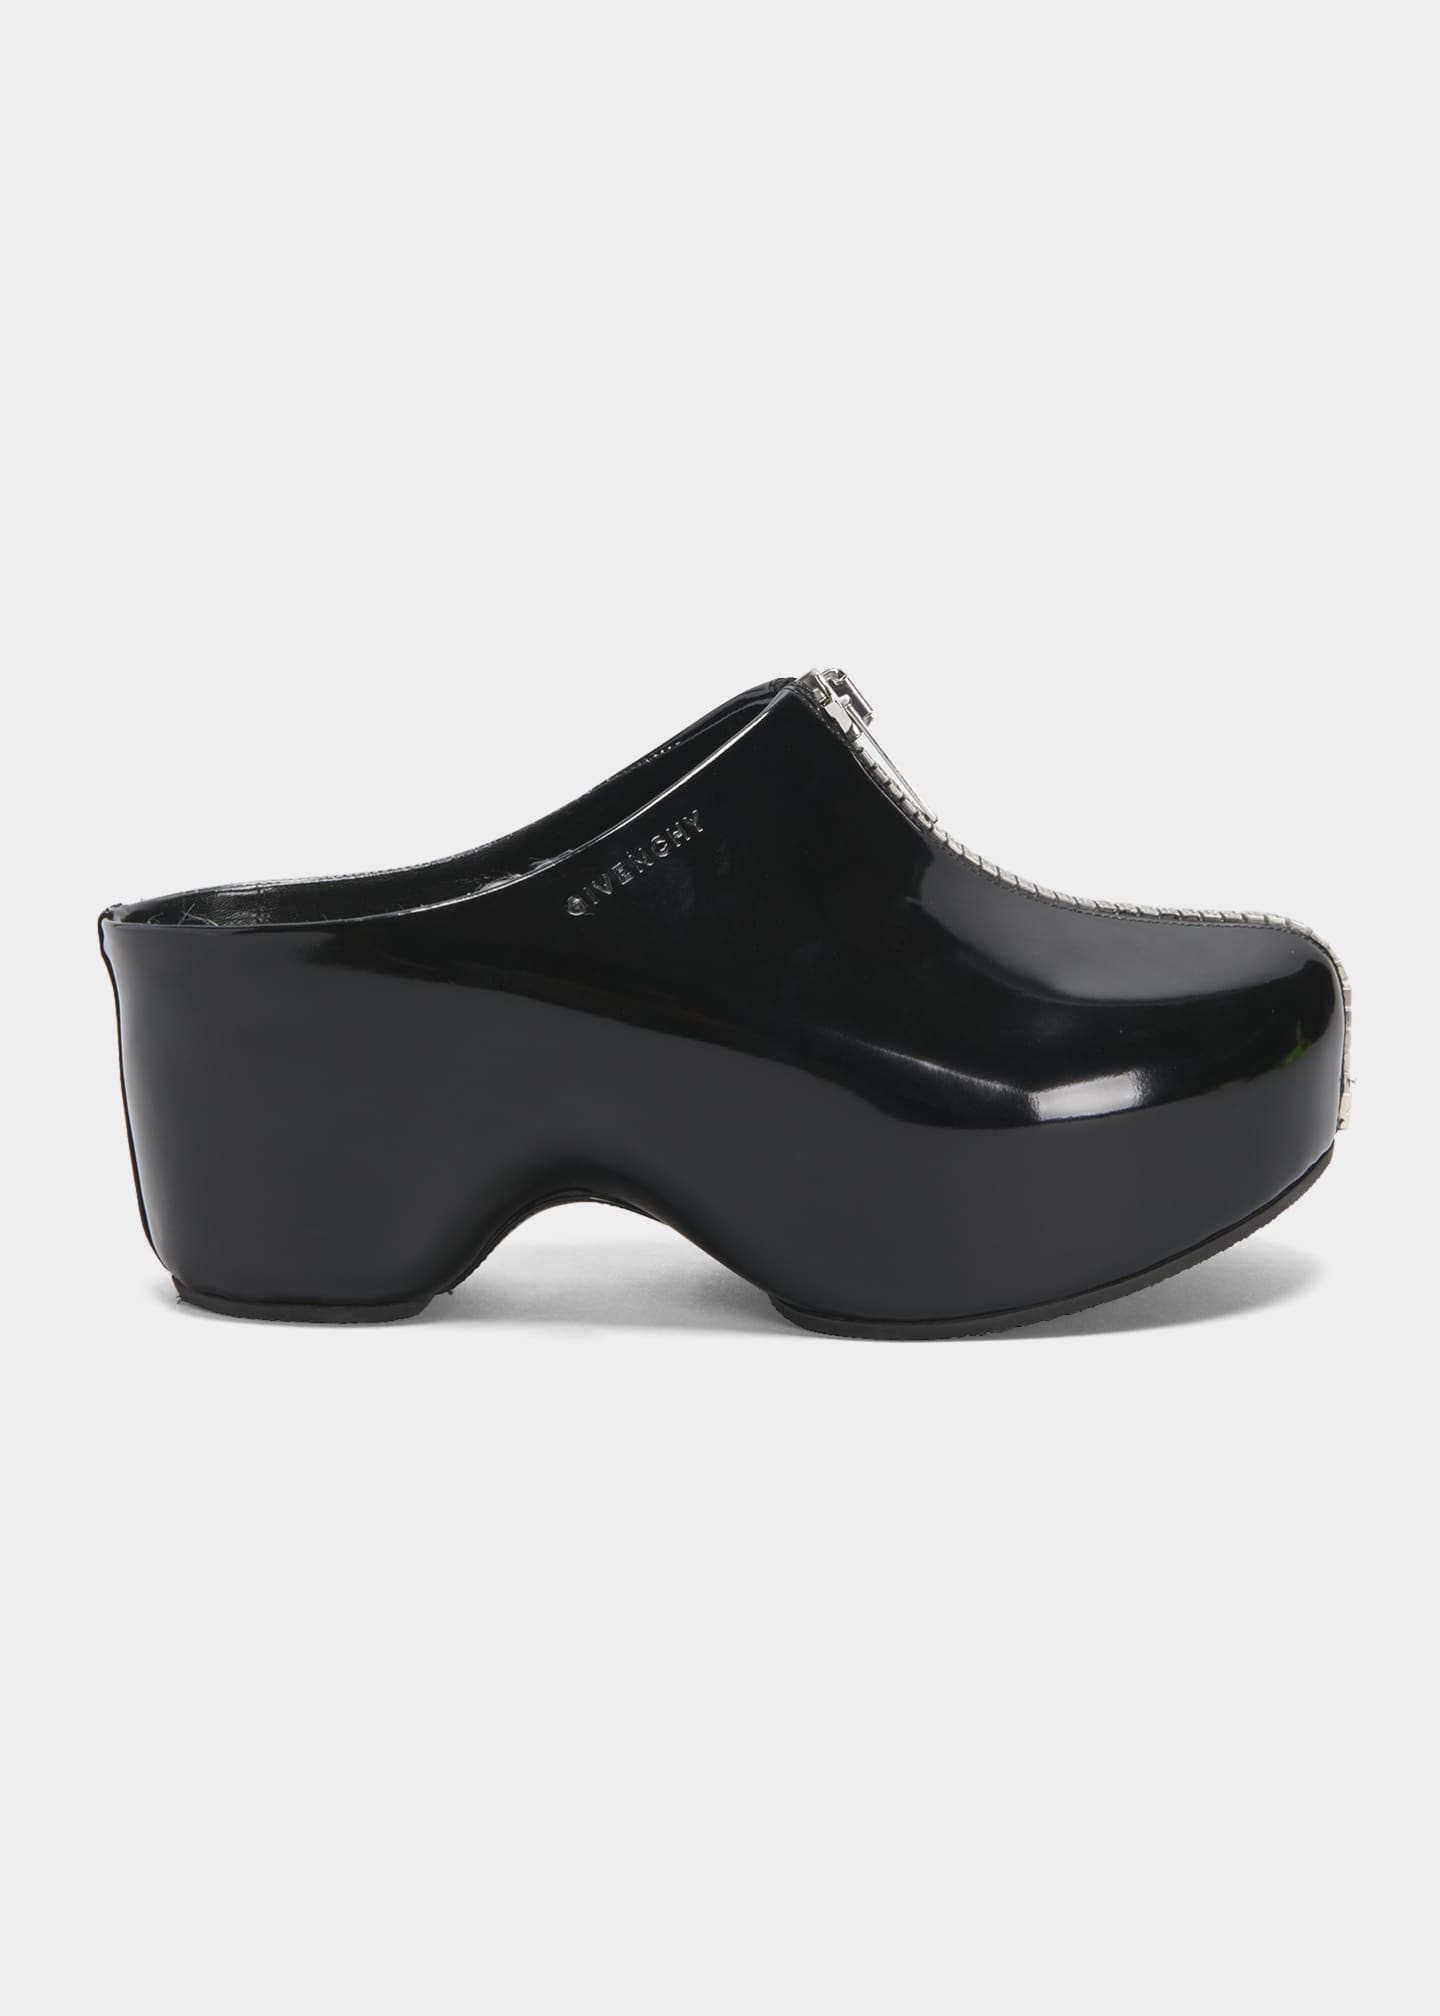 Givenchy G Patent Zip-Up Mule Clogs - Bergdorf Goodman